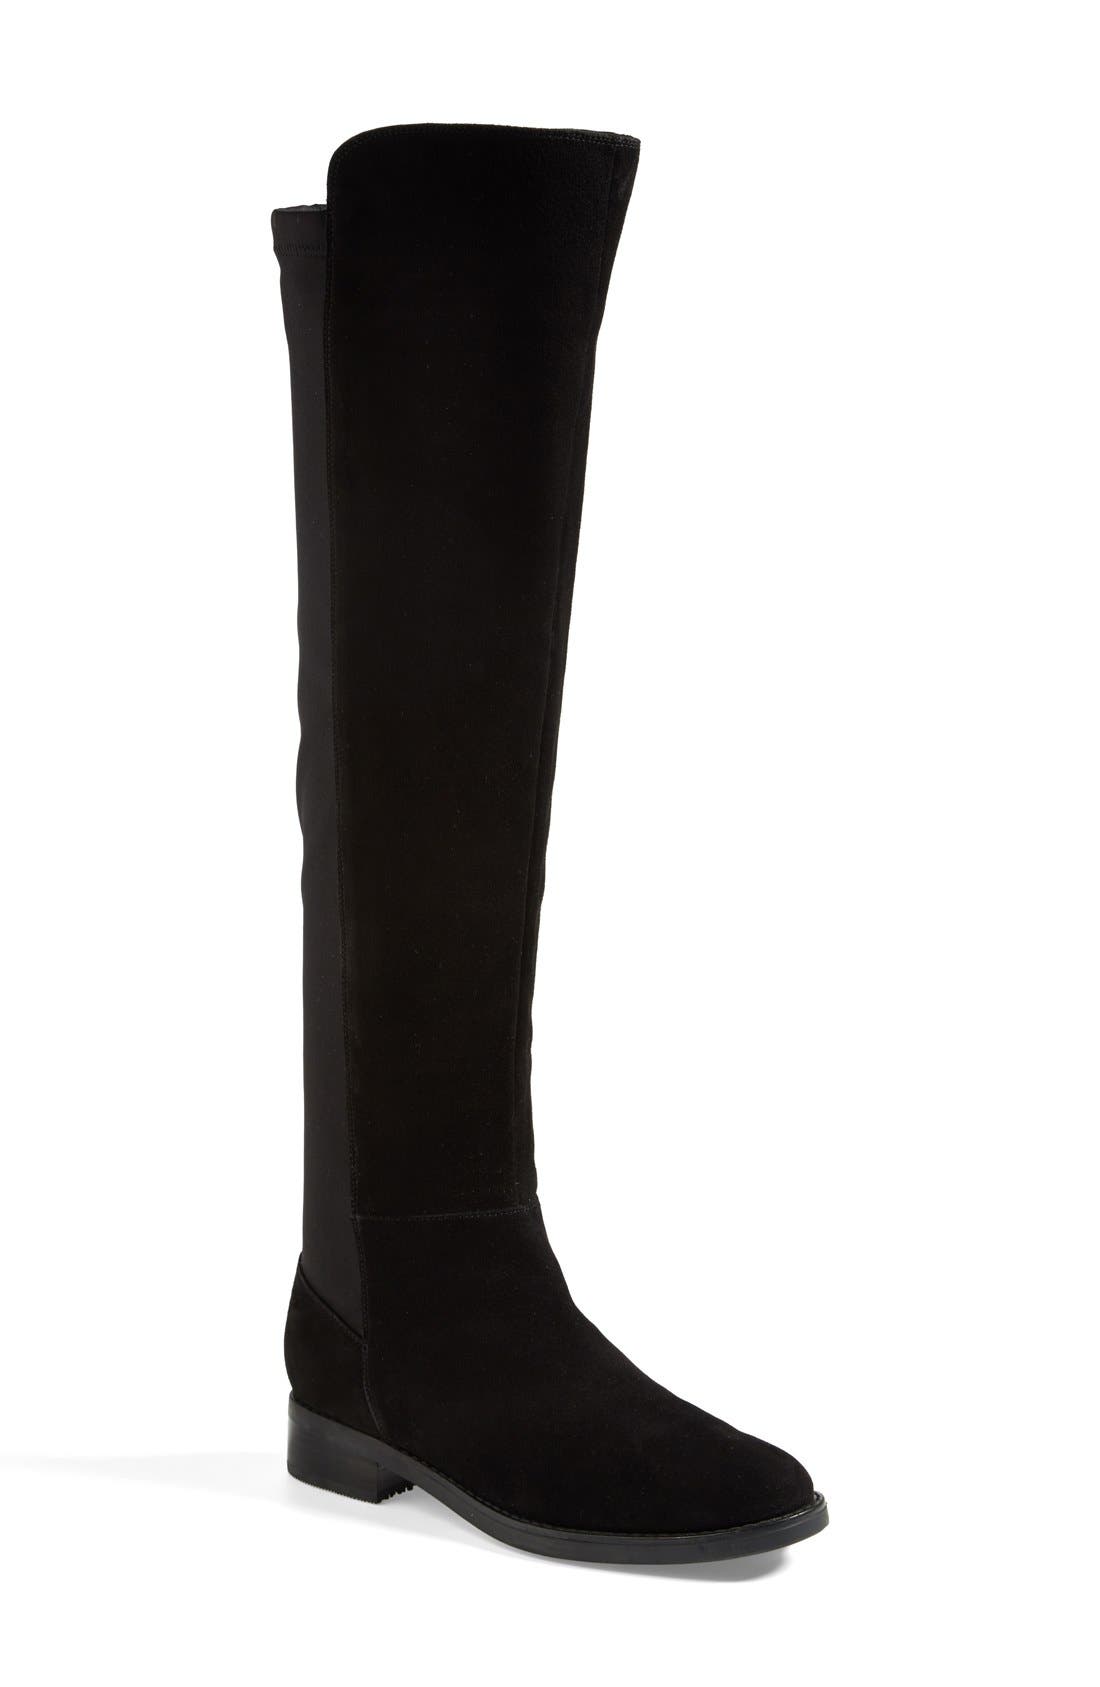 blondo suede over the knee boots